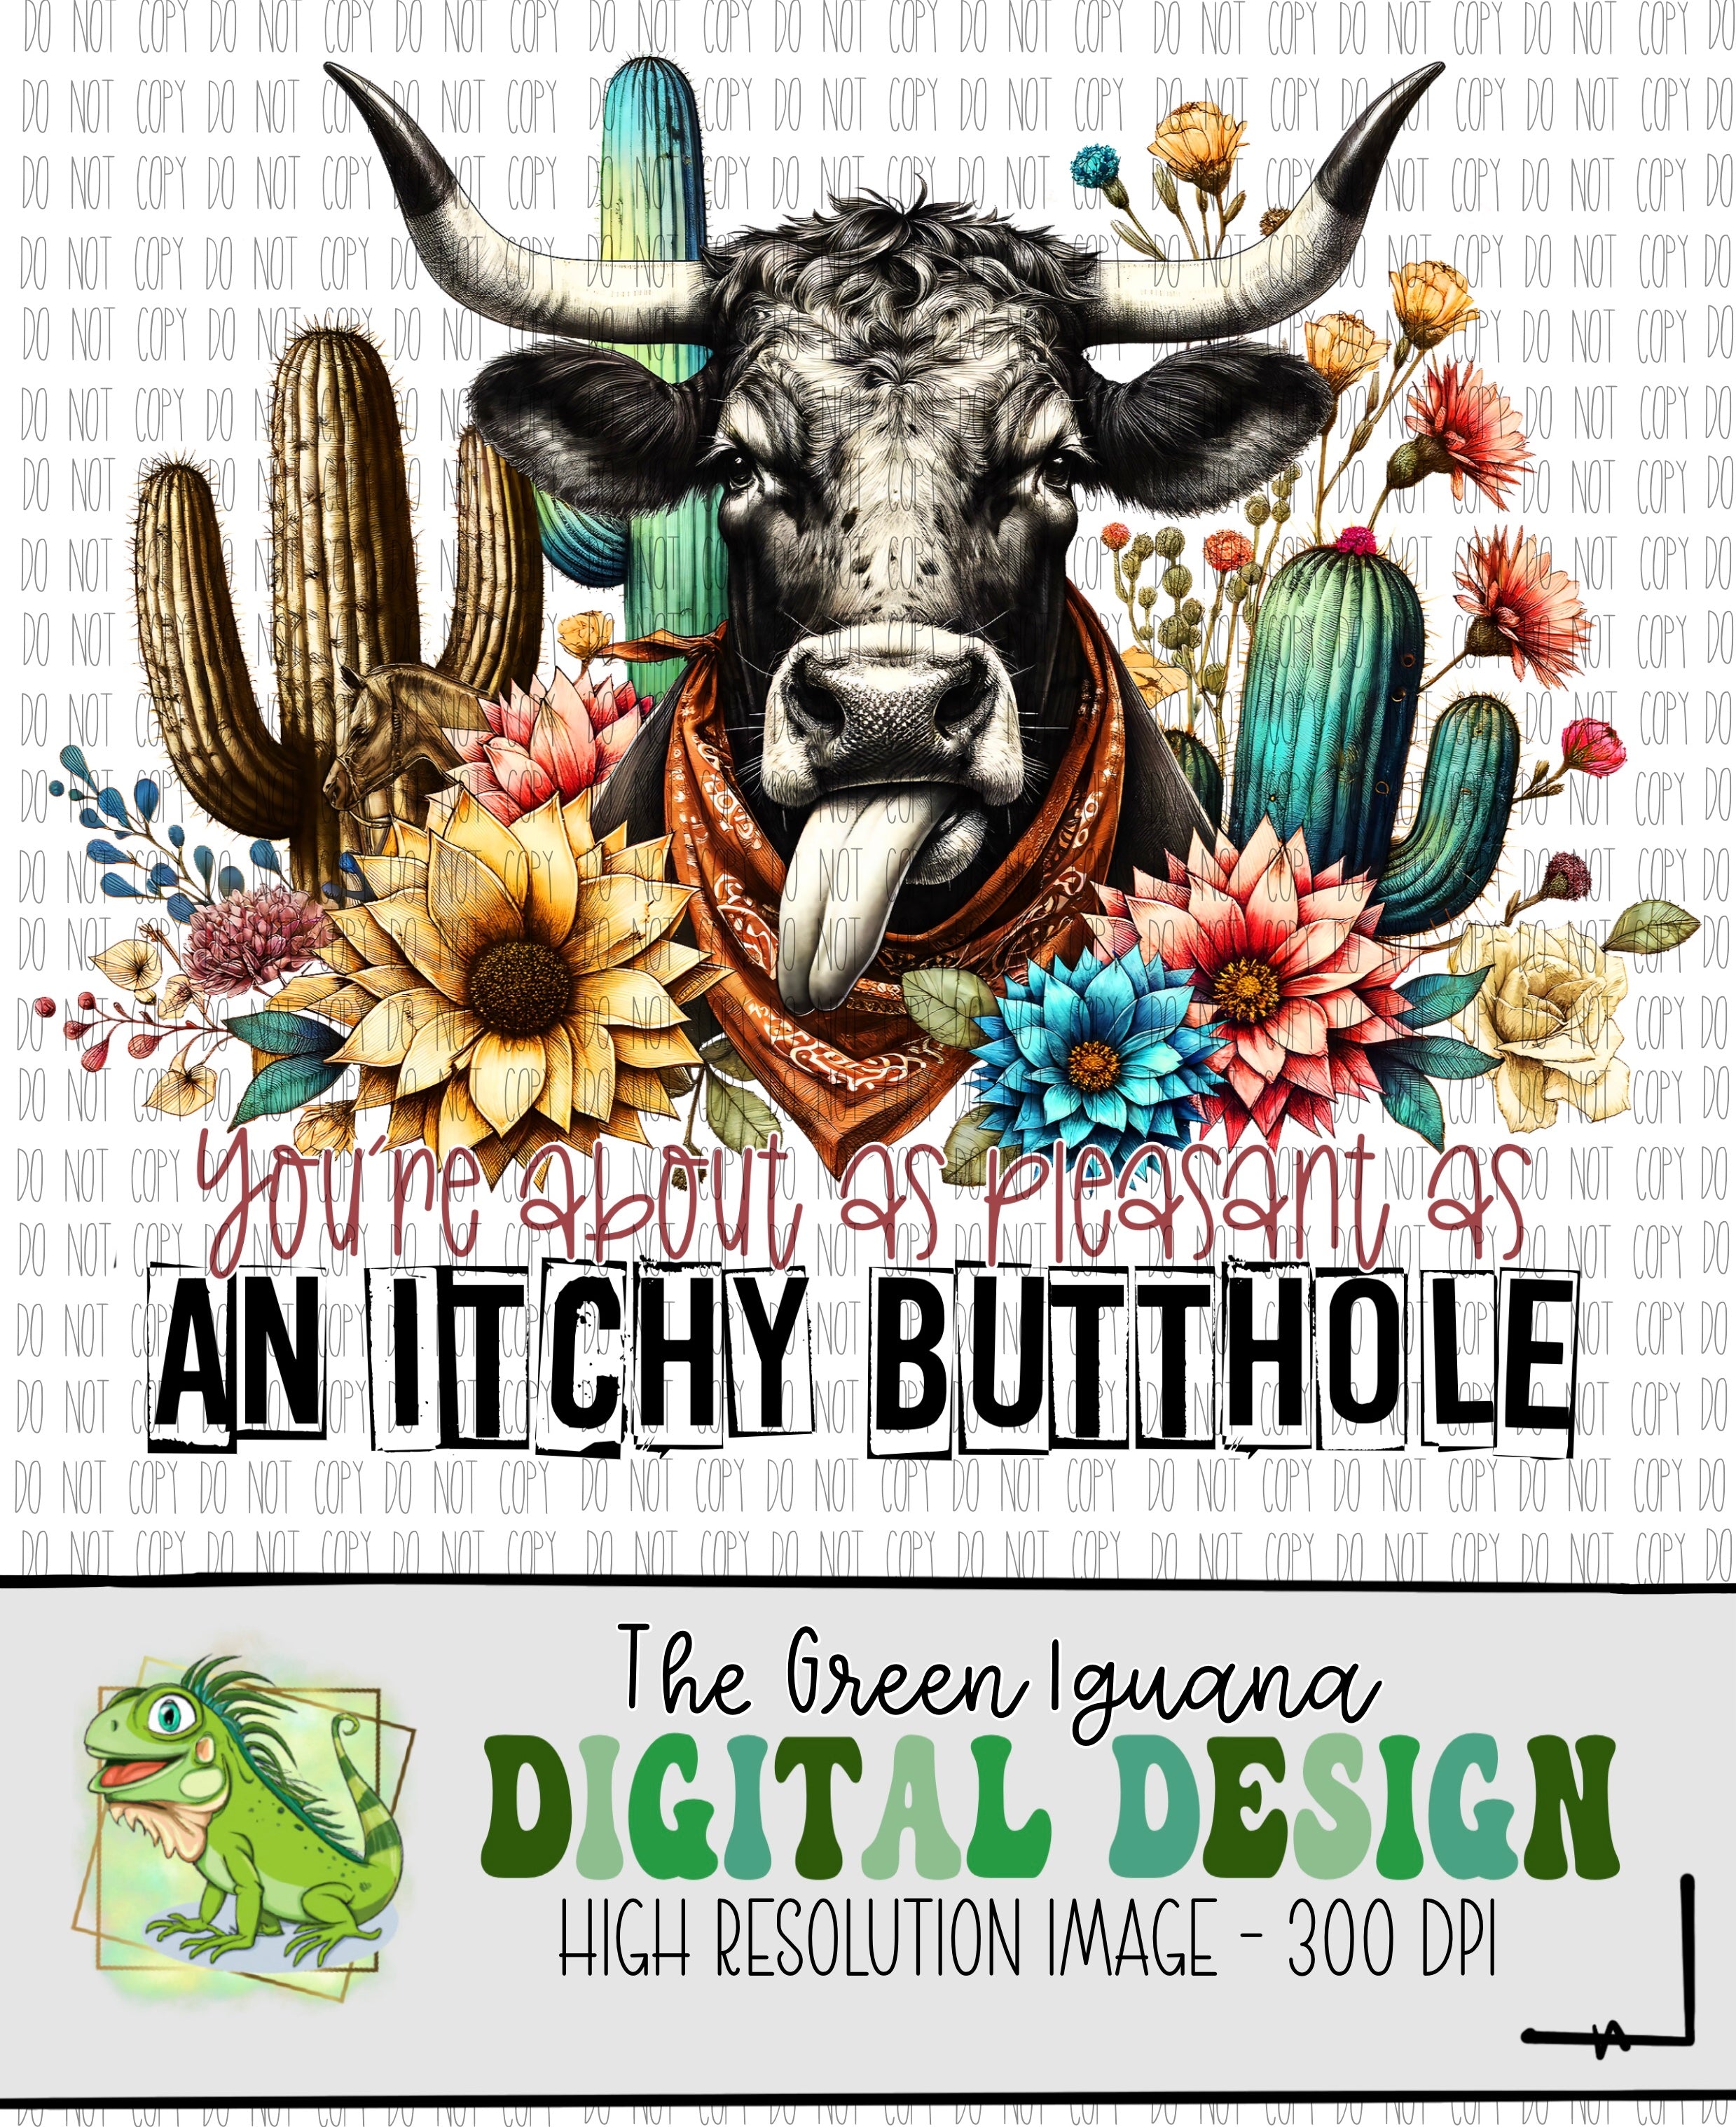 You’re about as pleasant as an itchy butthole - DIGITAL